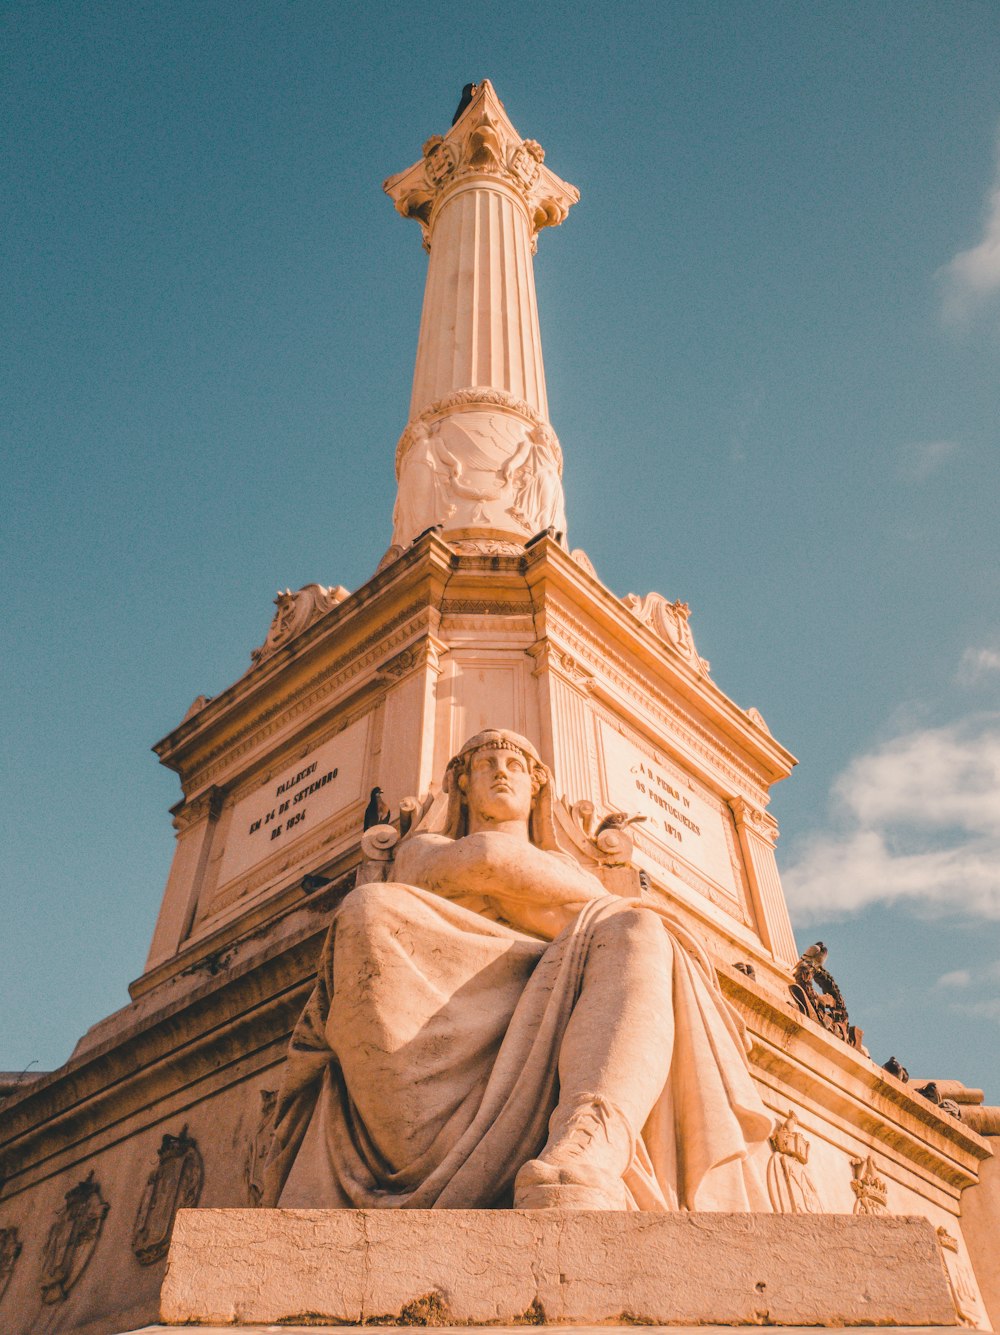 a statue of a woman sitting on top of a building